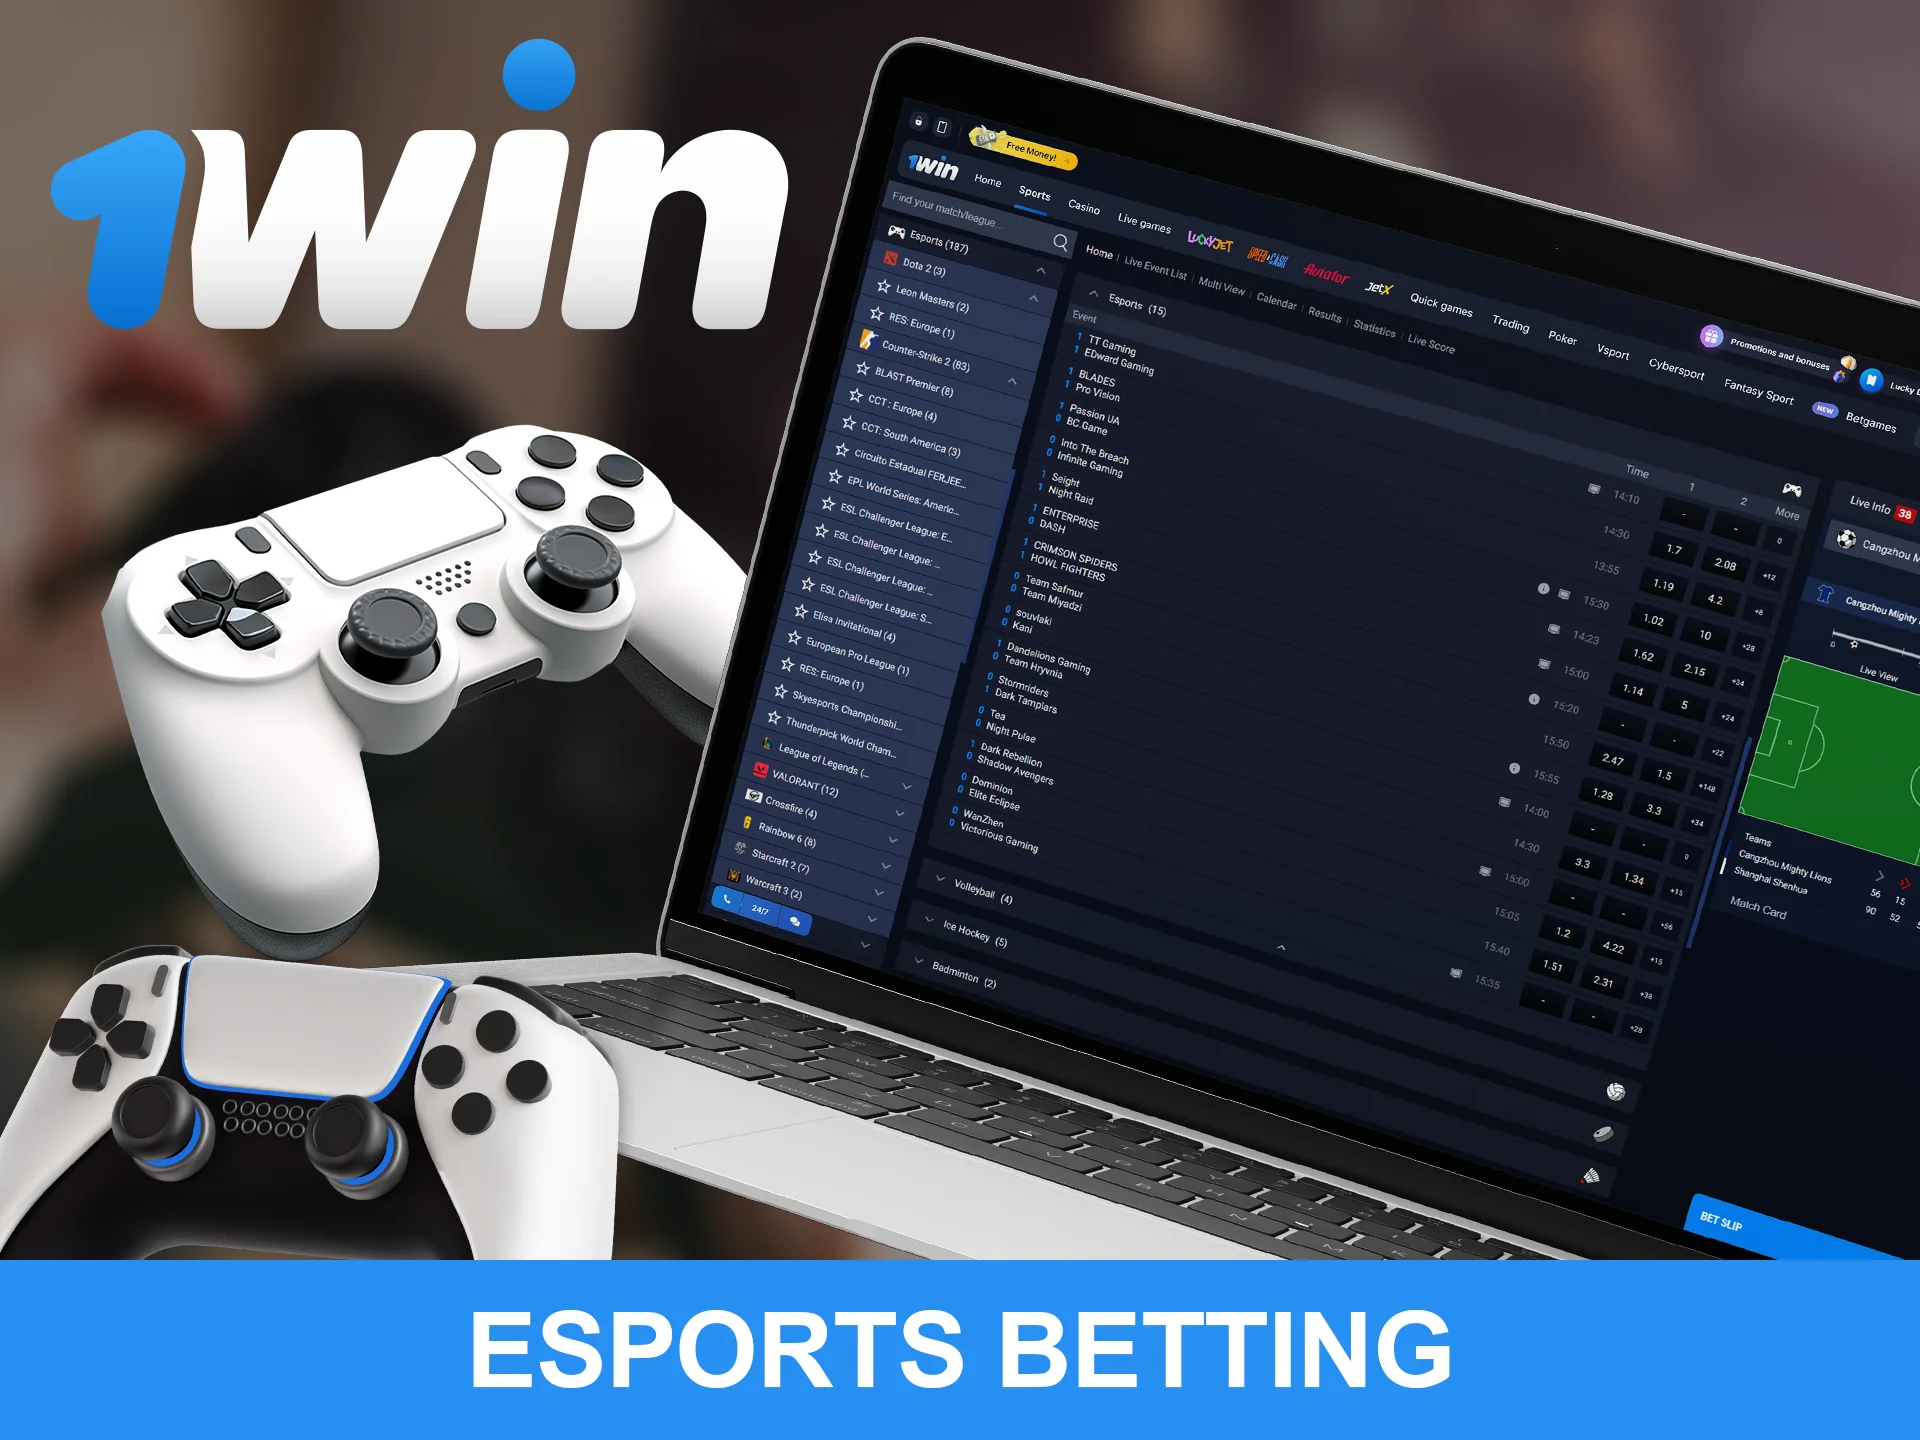 Take part in cyber sports tournaments at 1win.